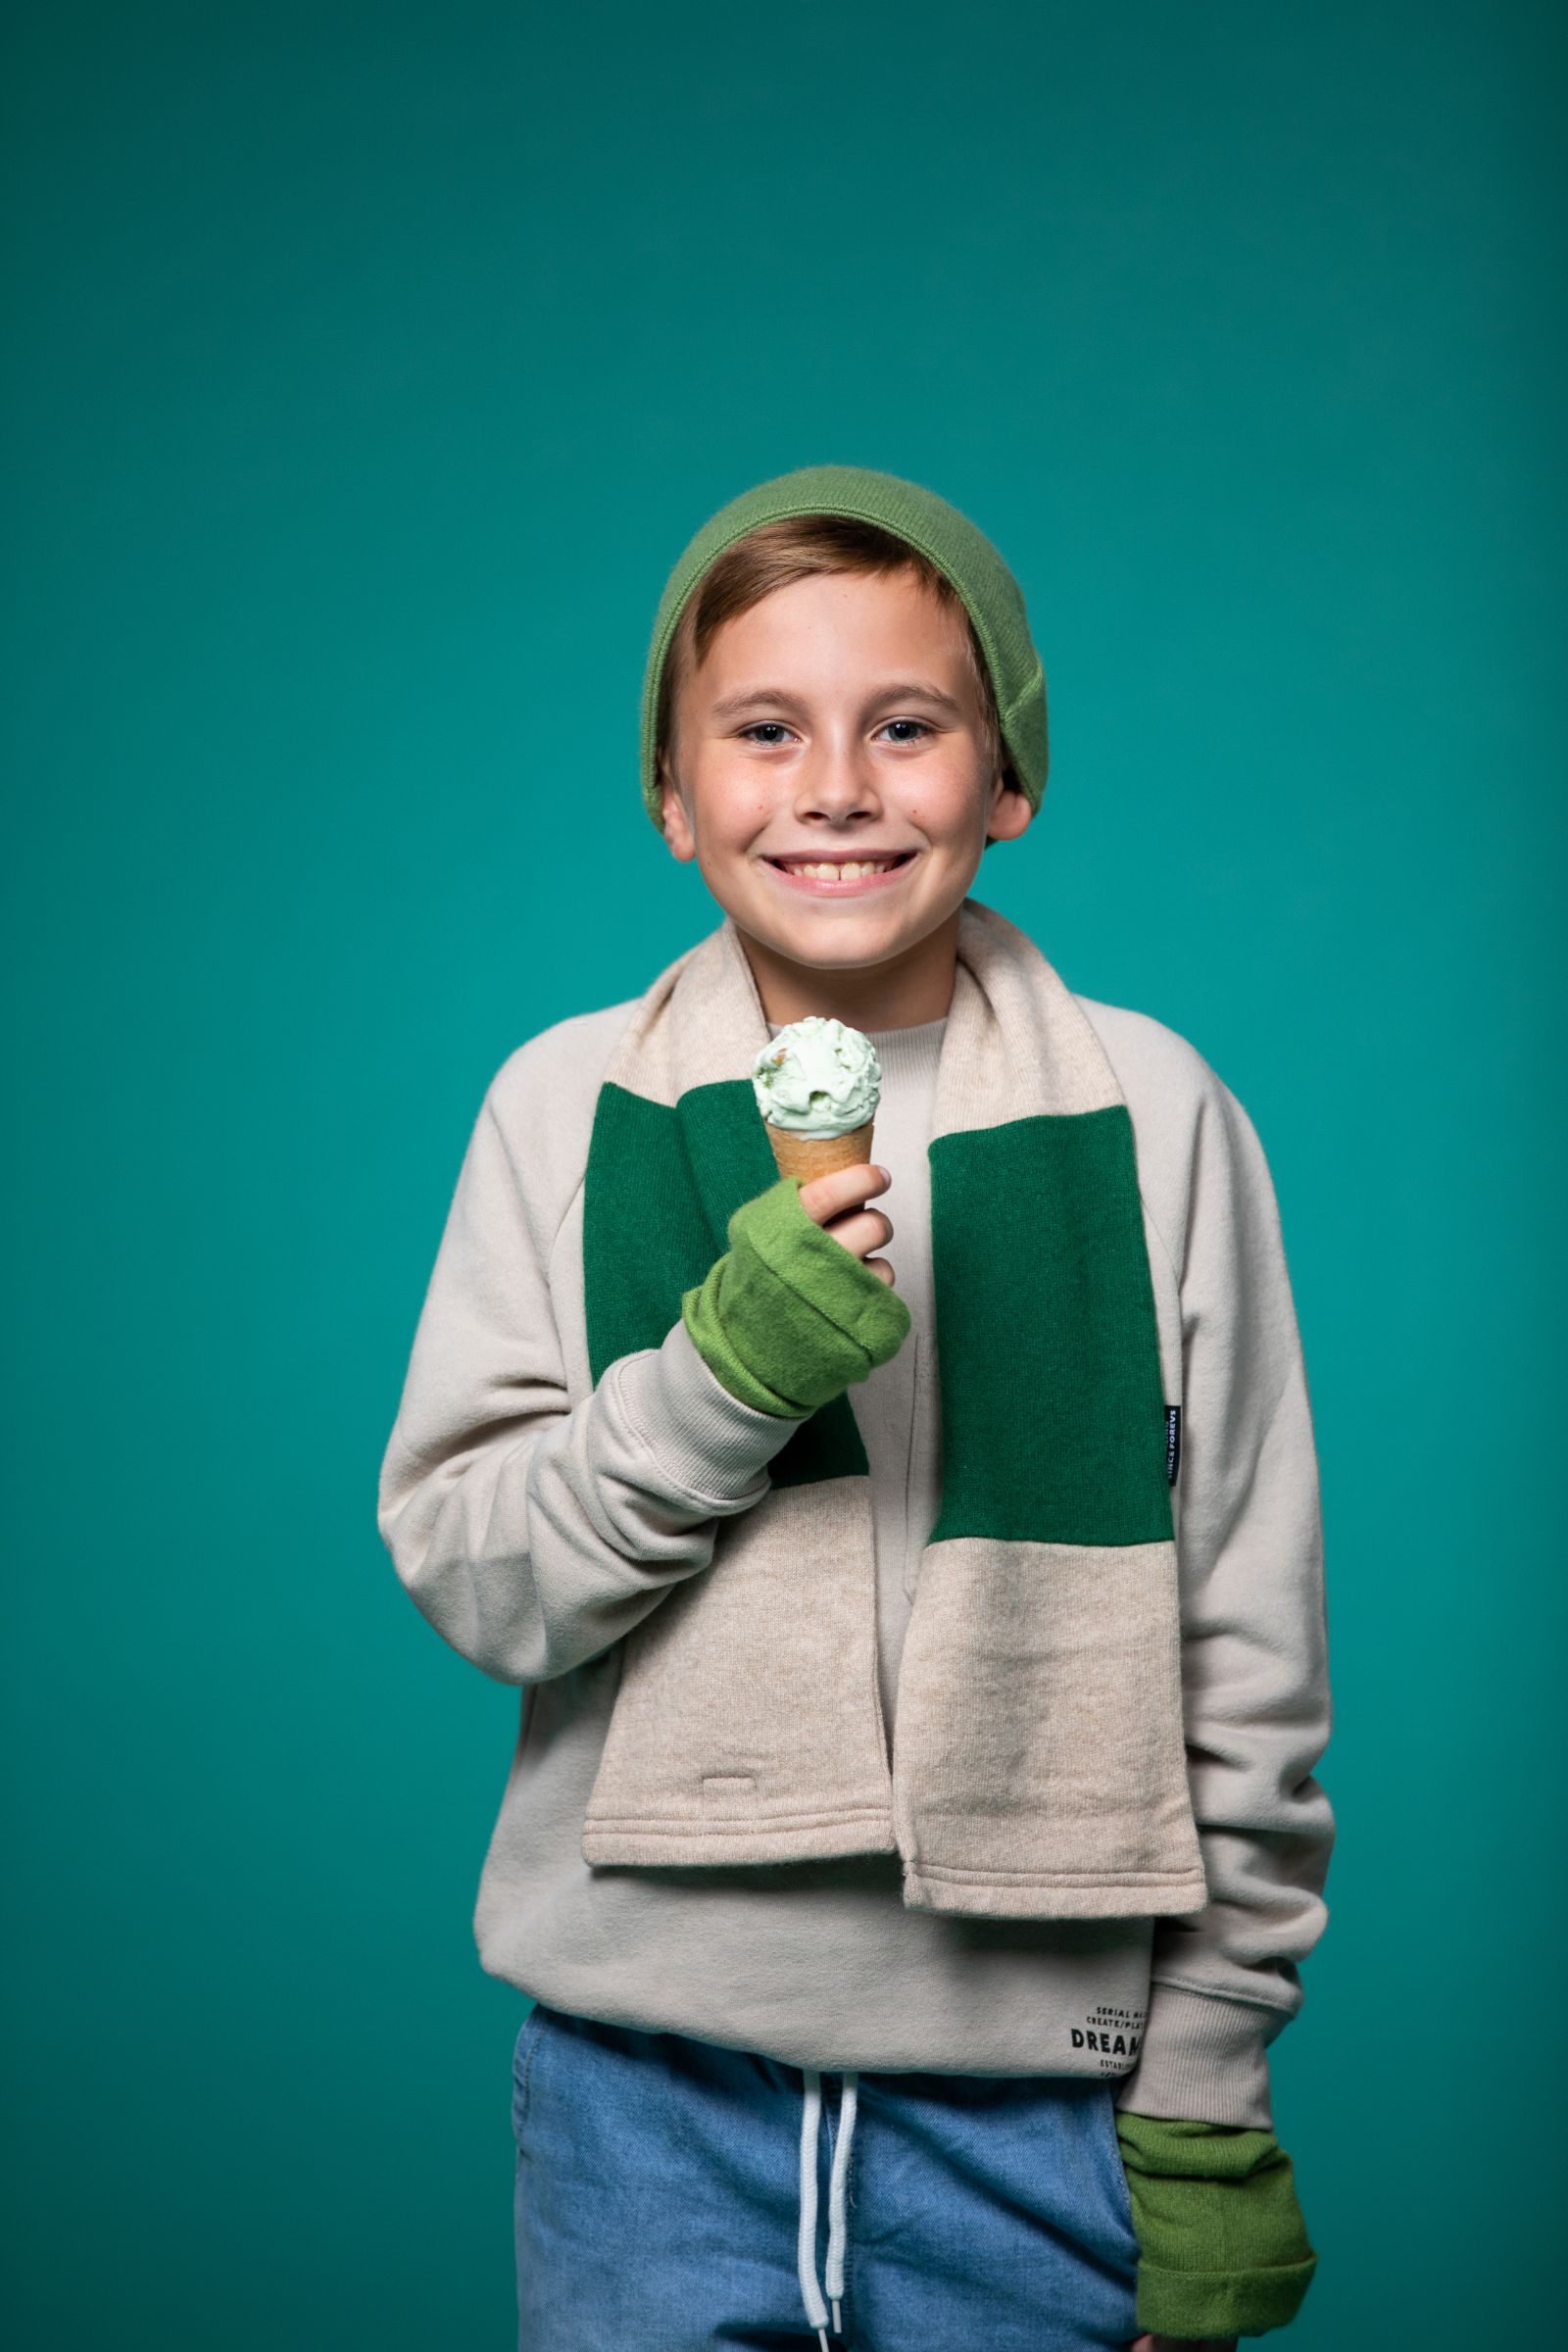 Boy with short blond hair against a teal background wearing a gray sweatshirt with blue jeans holding an ice cream cone smiling and posing for the camera.